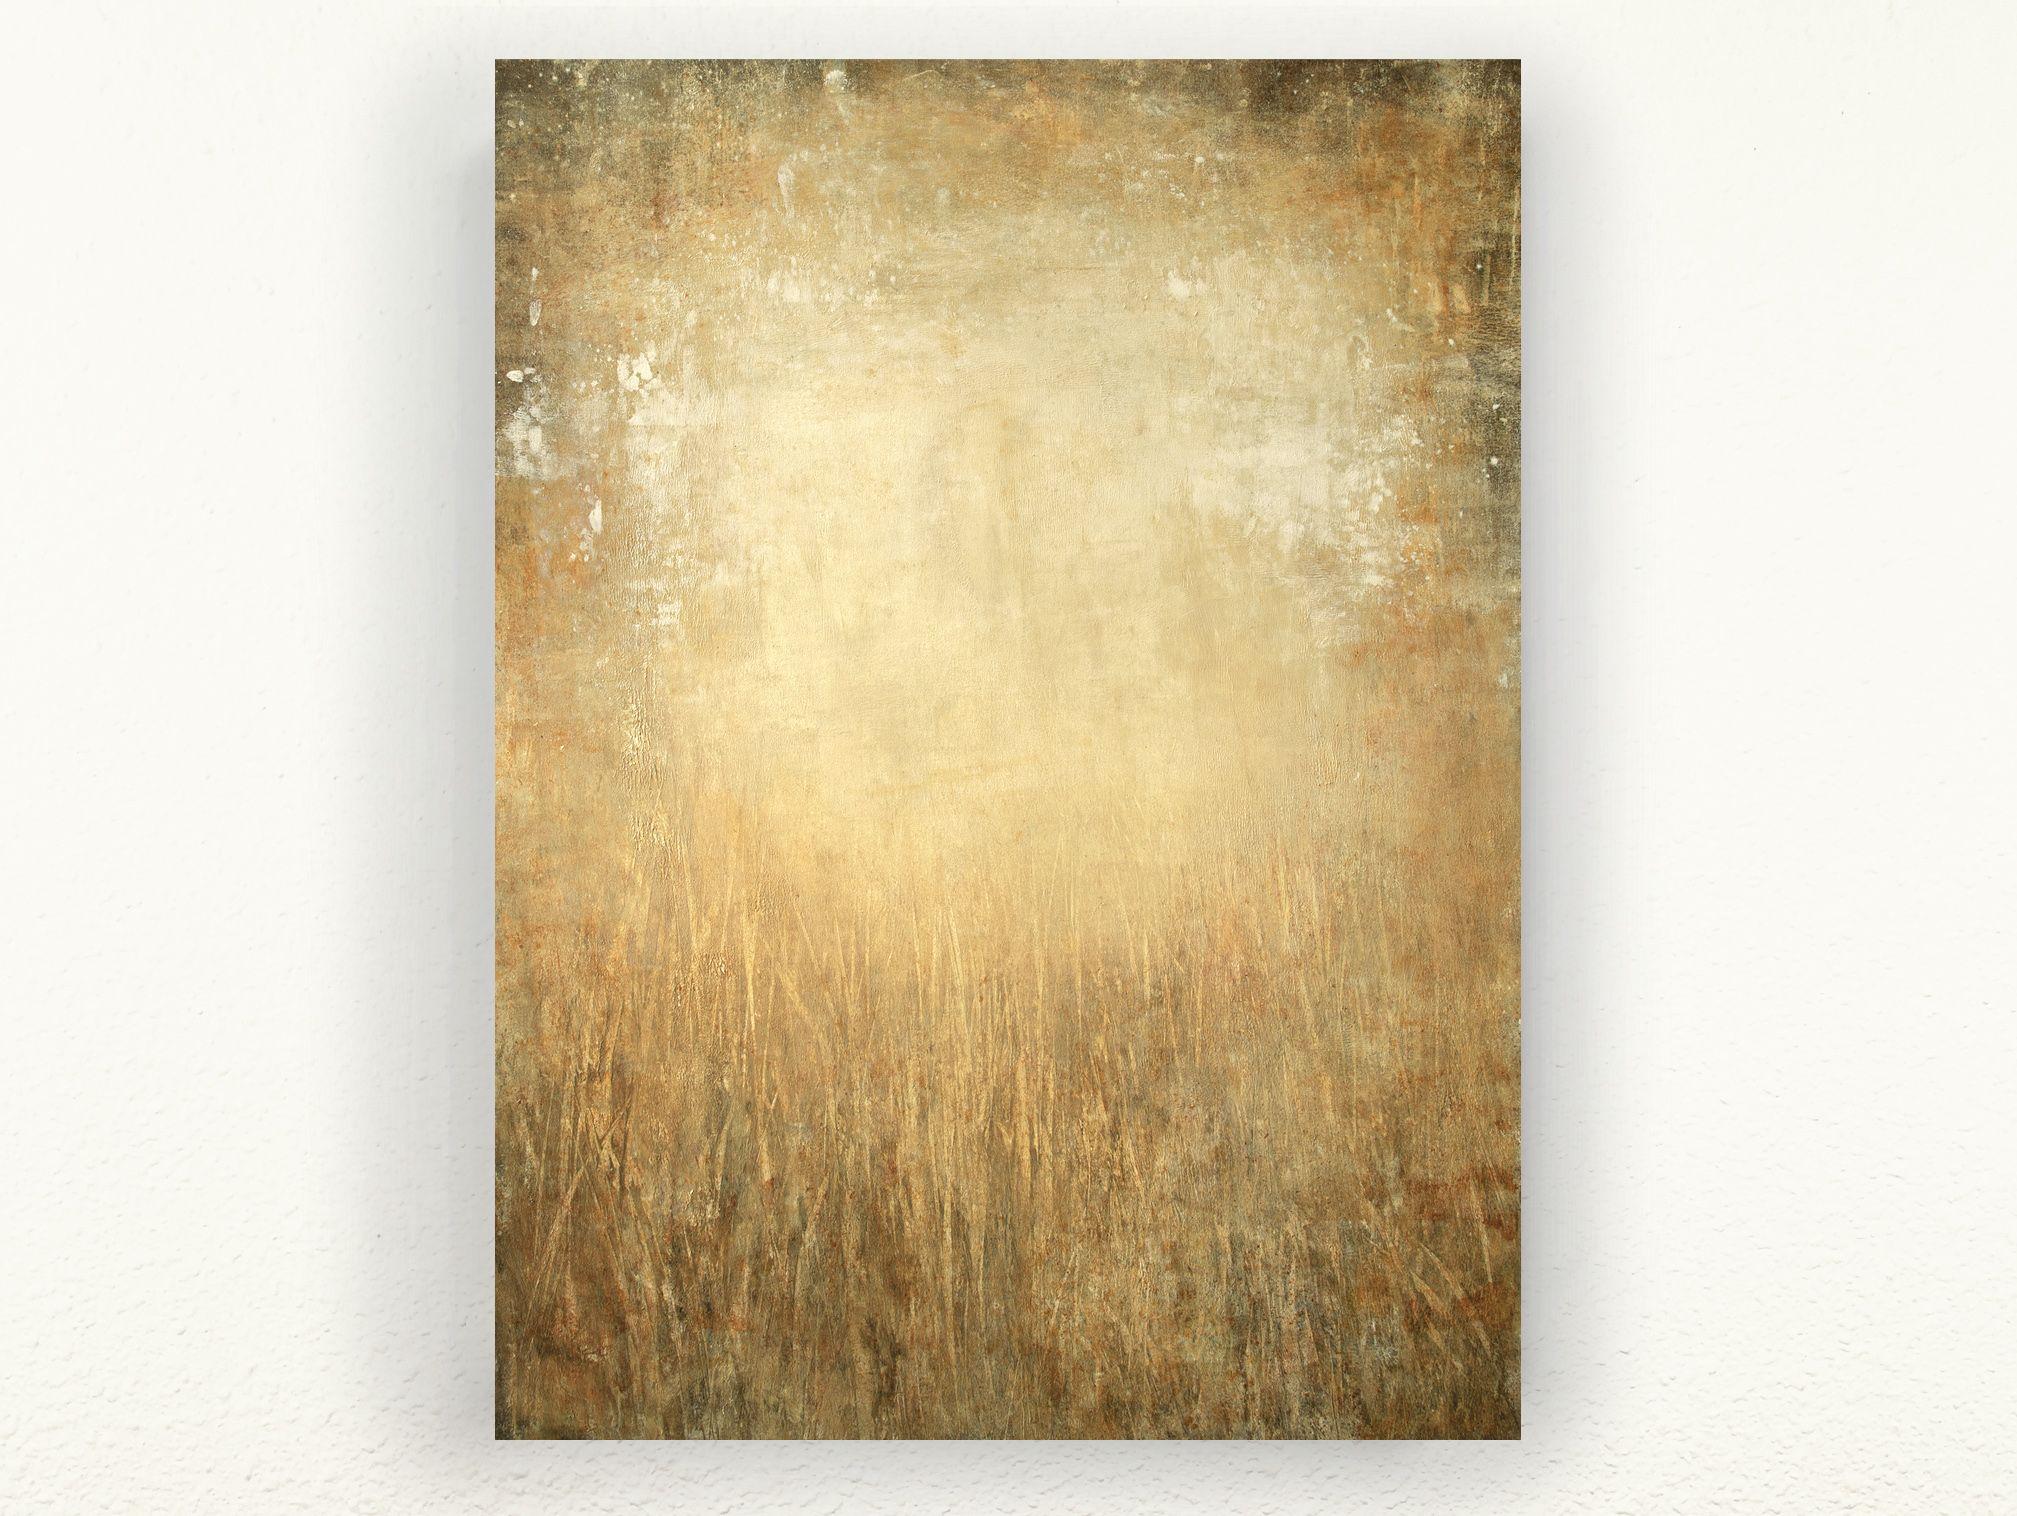 Golden Light 230502 is a minimalist gold and white abstract painting created with palette knives and non traditional tools. These bright paintings are part of my golden fields series which are based on the glowing light of a calm day out in the